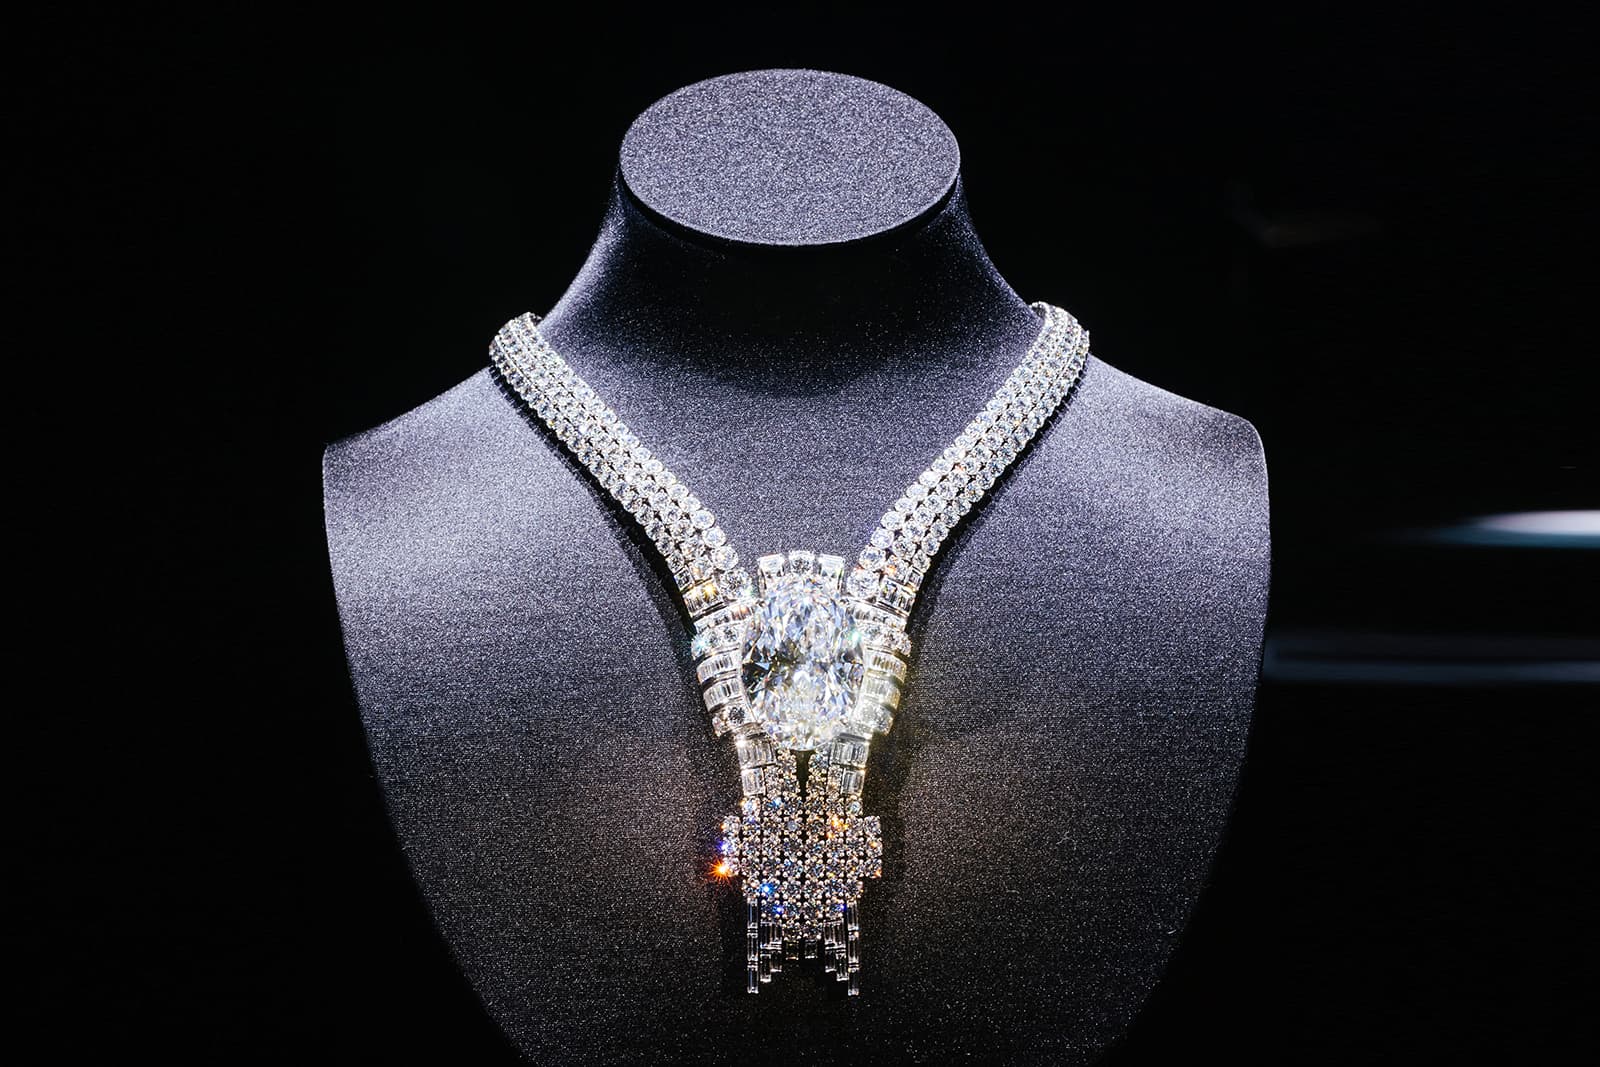 The Tiffany & Co. World's Fair necklace with the 80 carat Empire Diamond